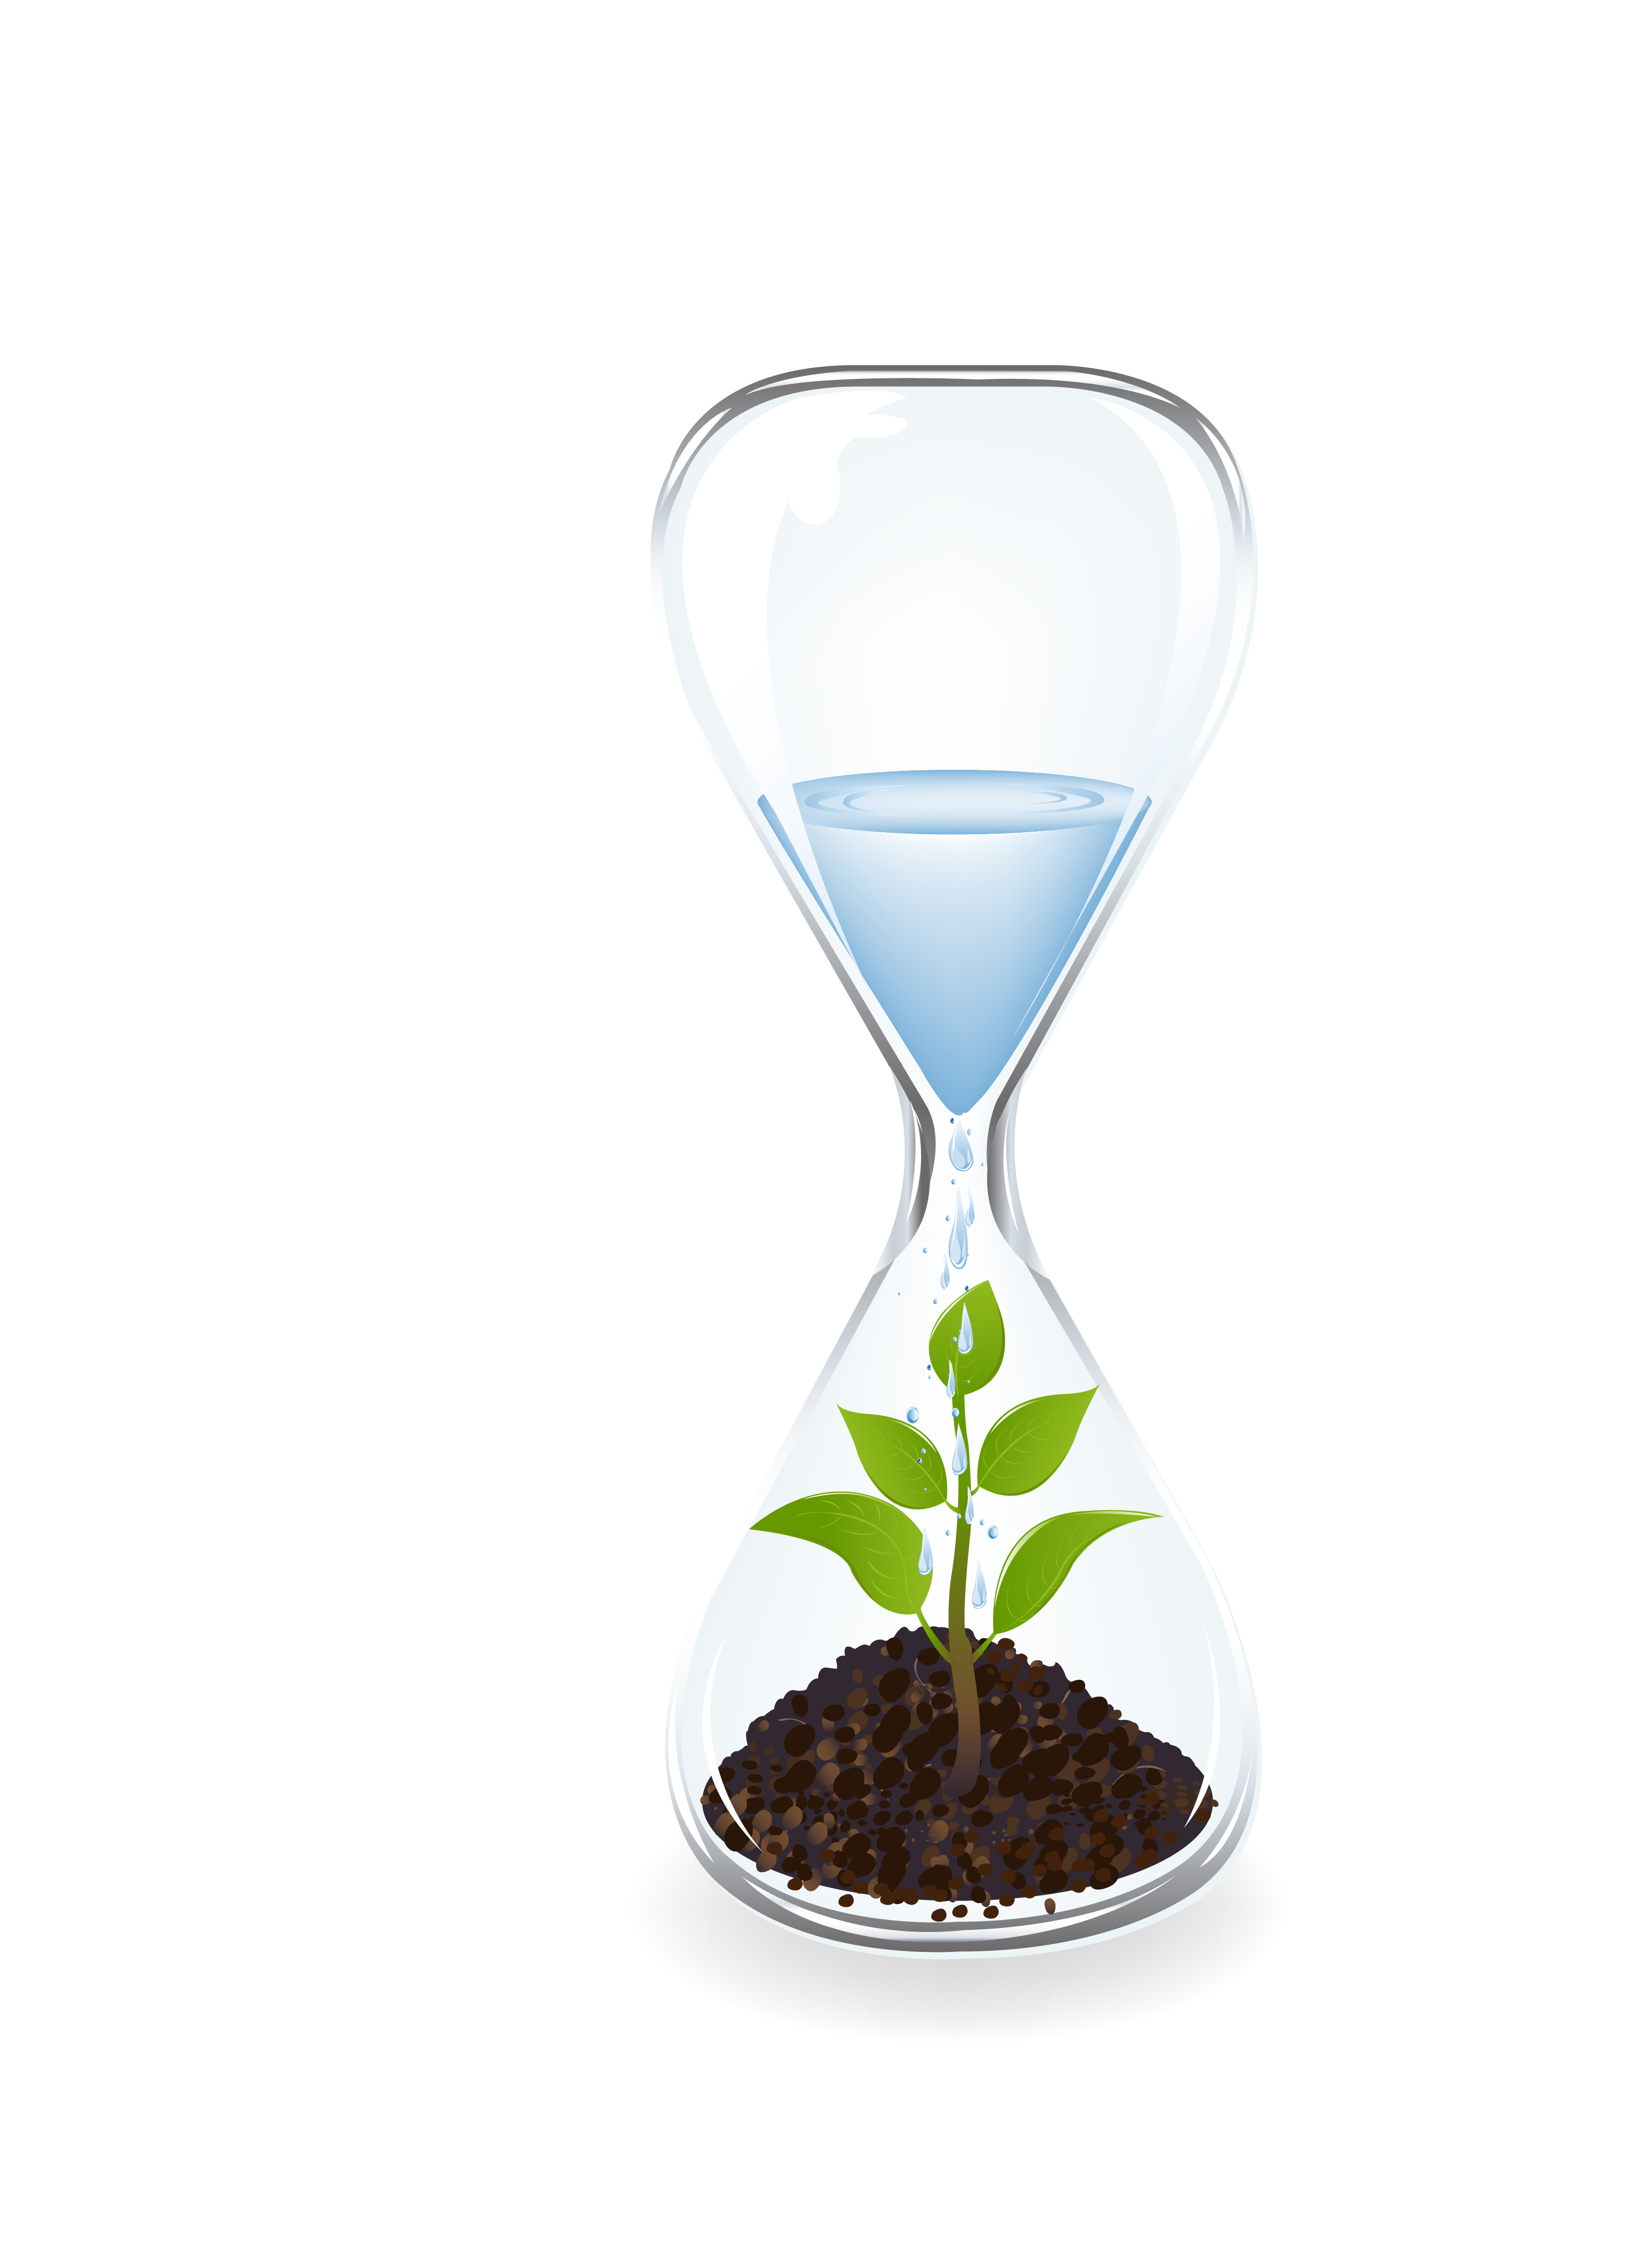 Time Sand Clock PNG Free Image